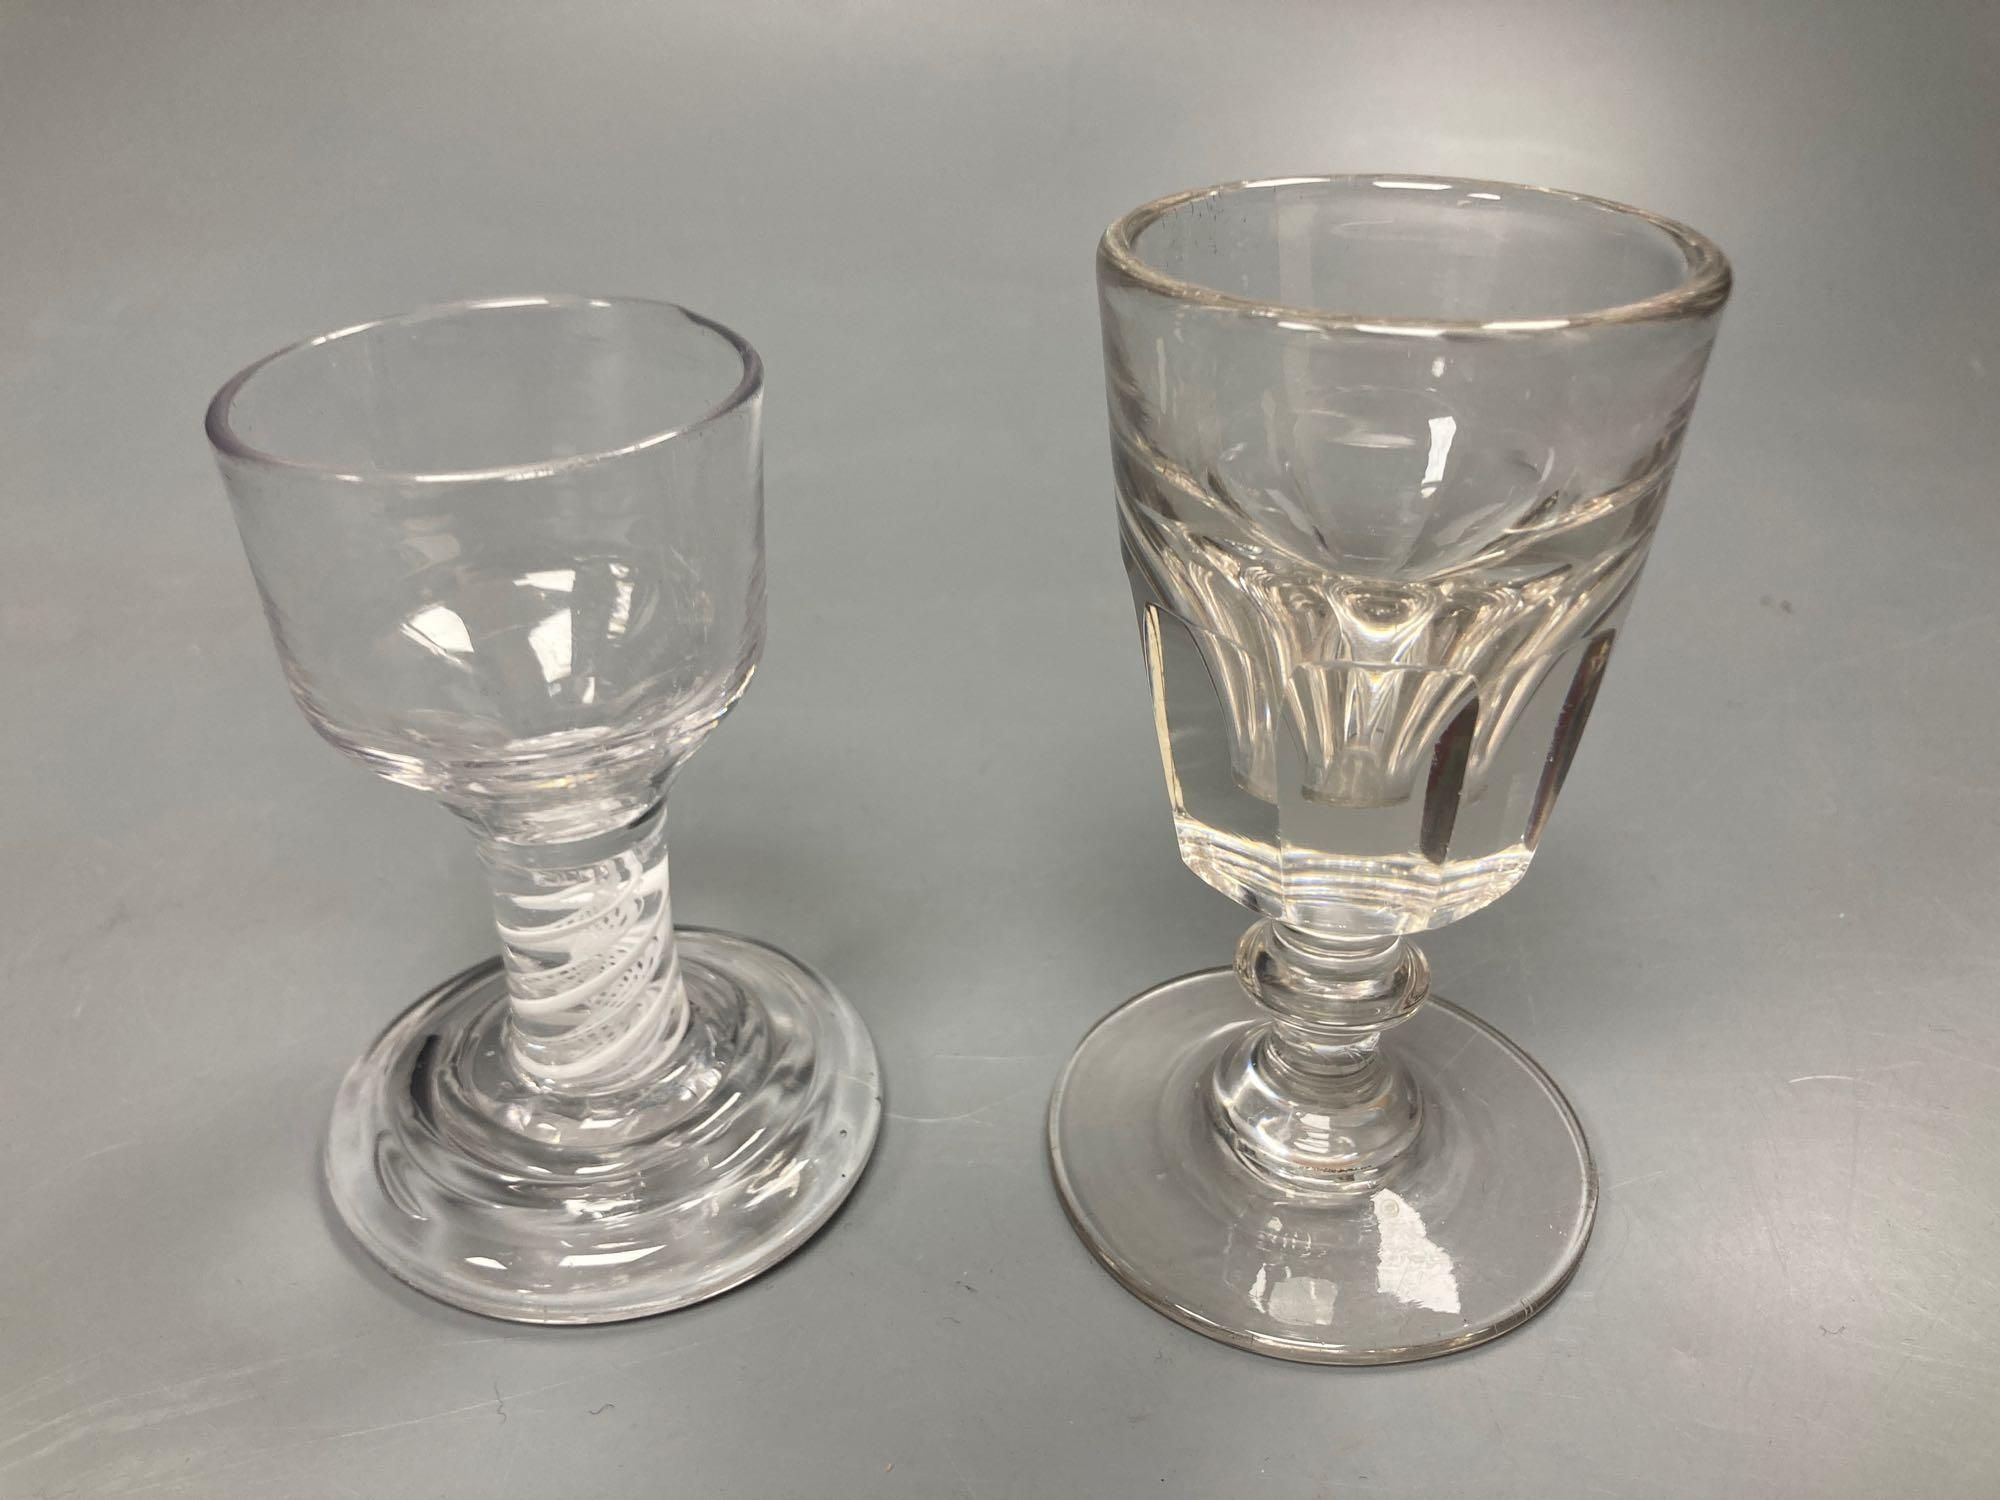 Two toasting glasses, one with air twist stem